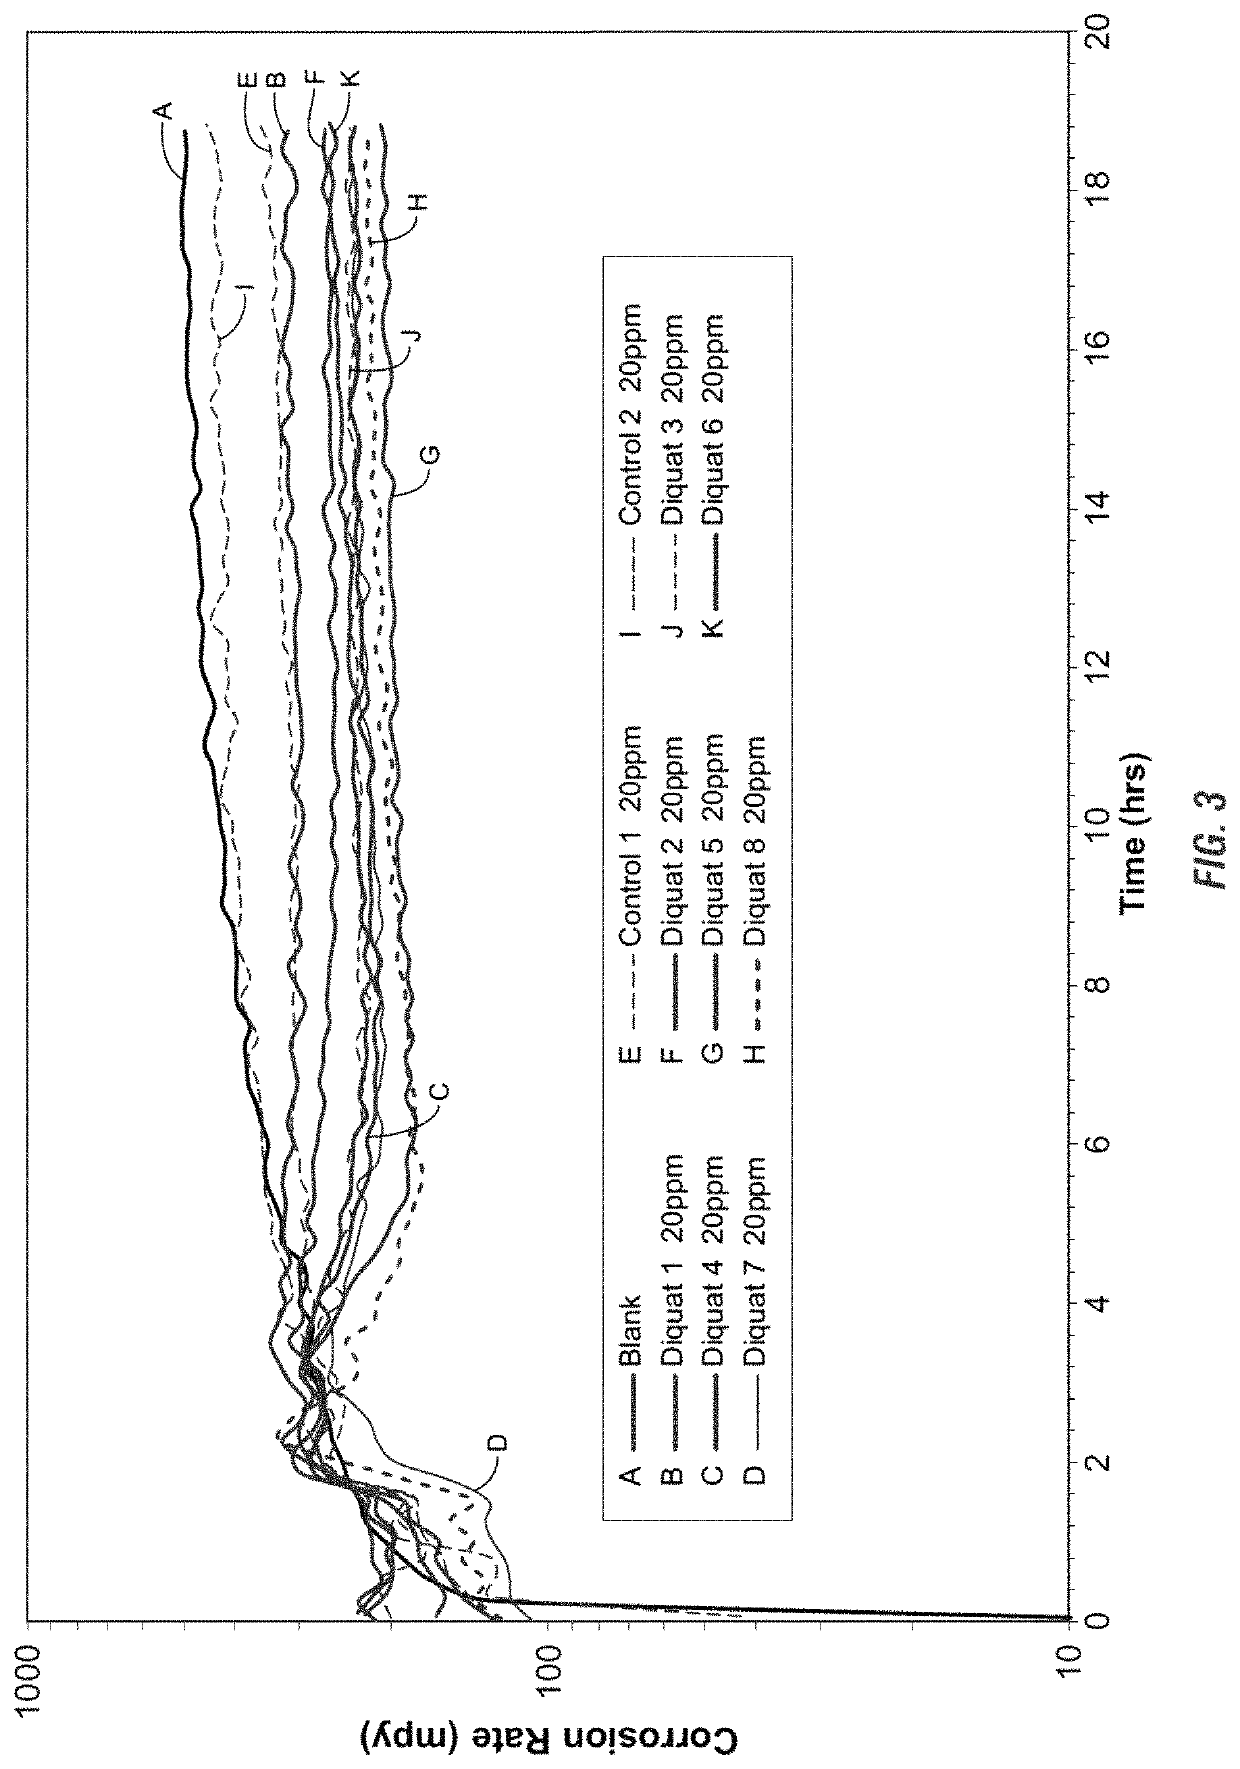 Use of di-ionic compounds as corrosion inhibitors in a water system